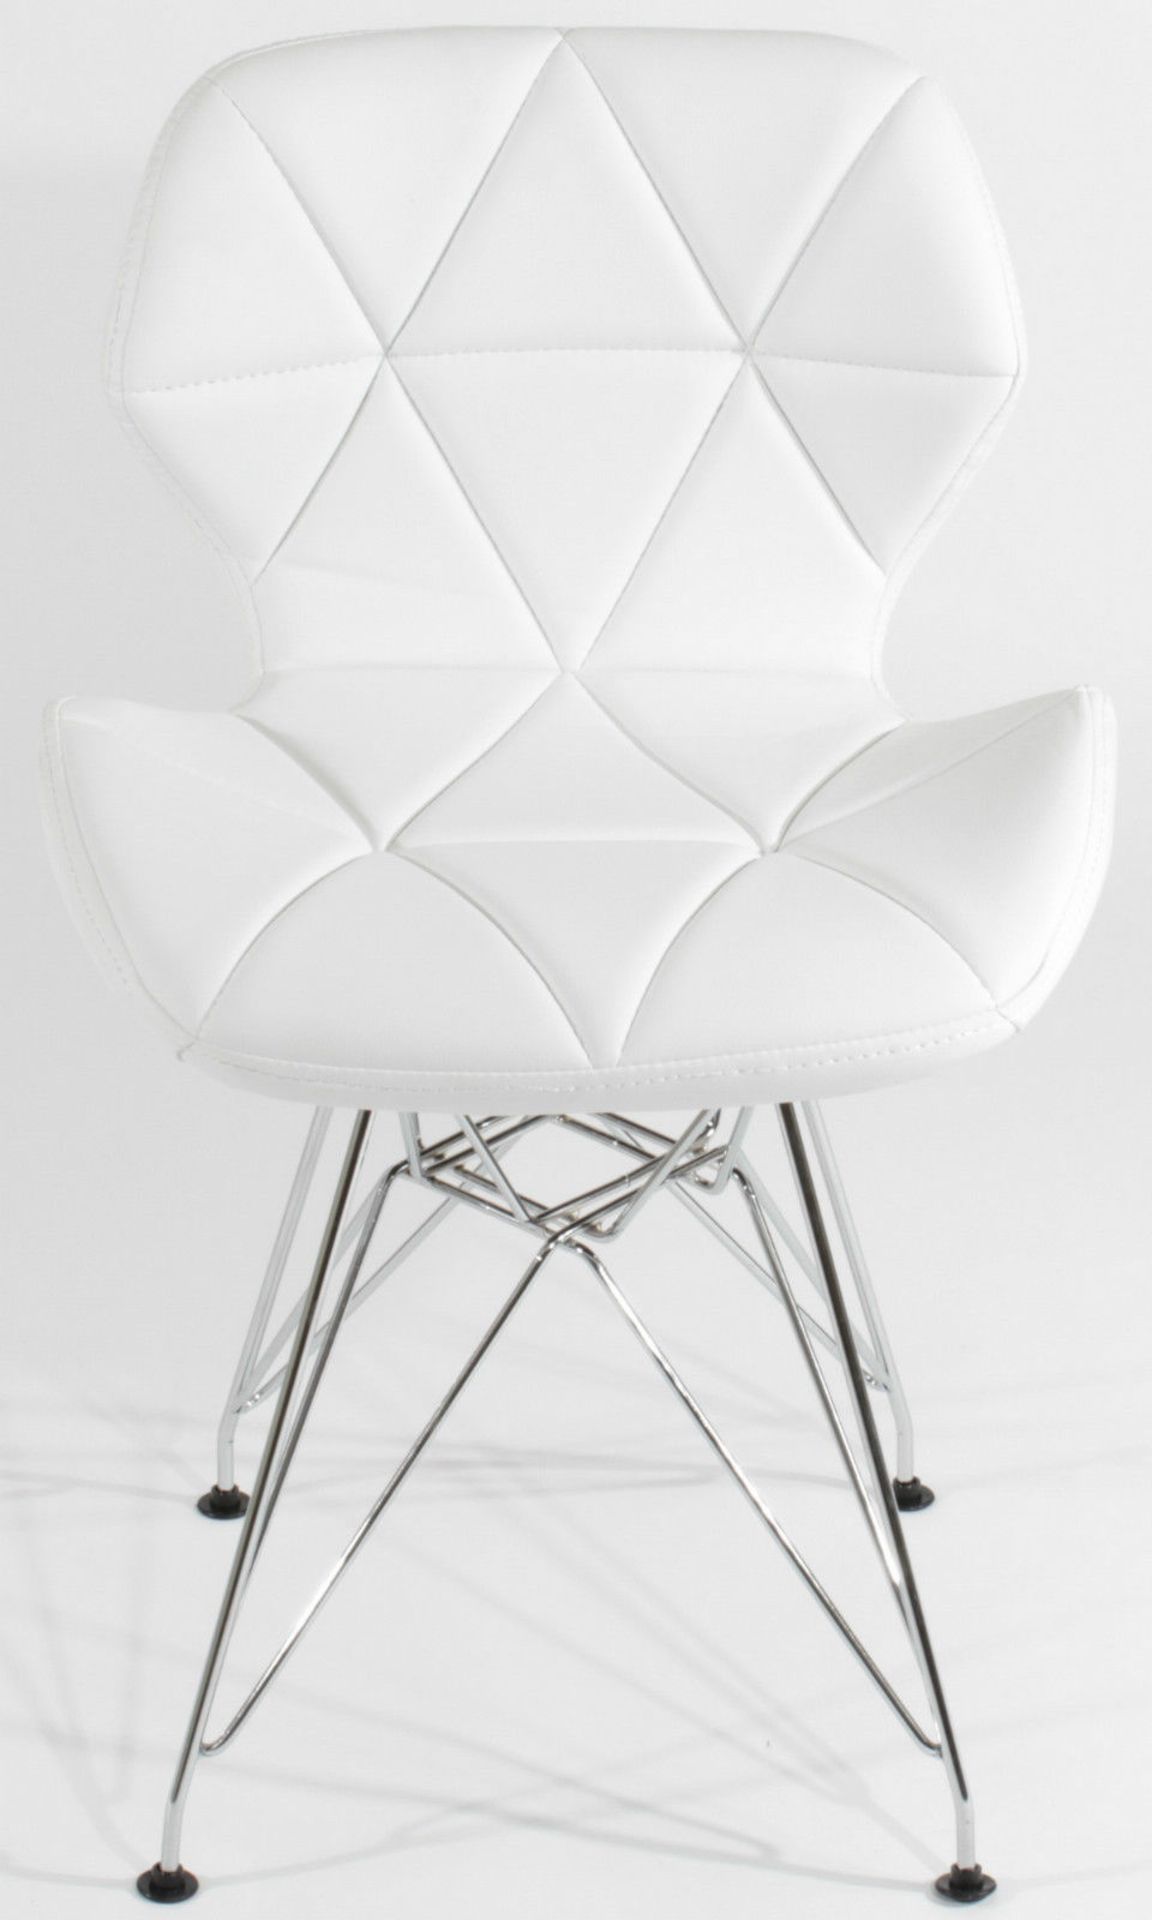 A Pair Of Charles Jacobs Chairs White PU Leather With Metal Legs White Charles Jacobs Dining Chair - Image 2 of 2